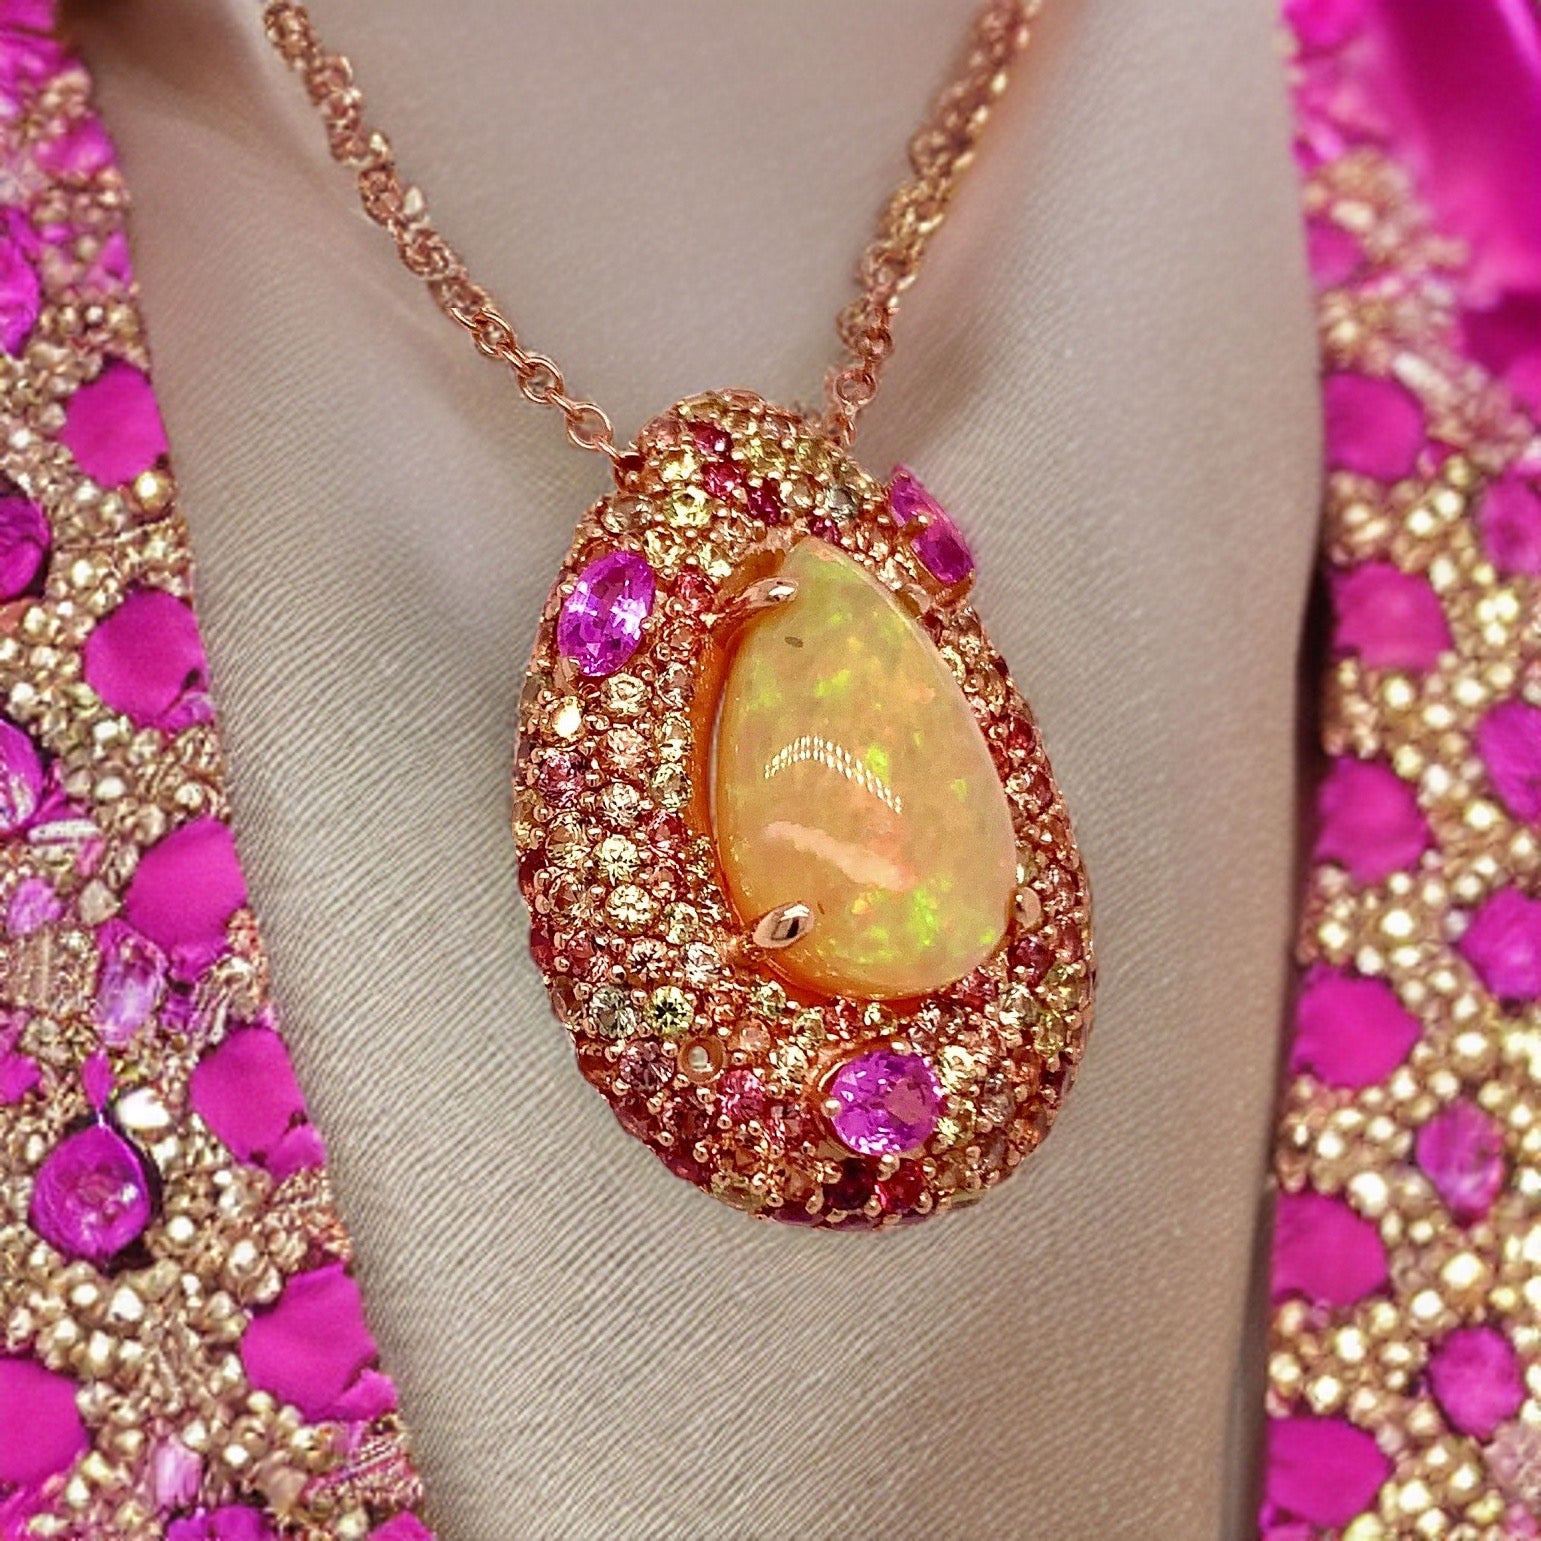 Buy Peruvian Pink Opal and Niassa Ruby Pendant Necklace 20 Inches in  Platinum Over Sterling Silver 6.60 ctw at ShopLC.